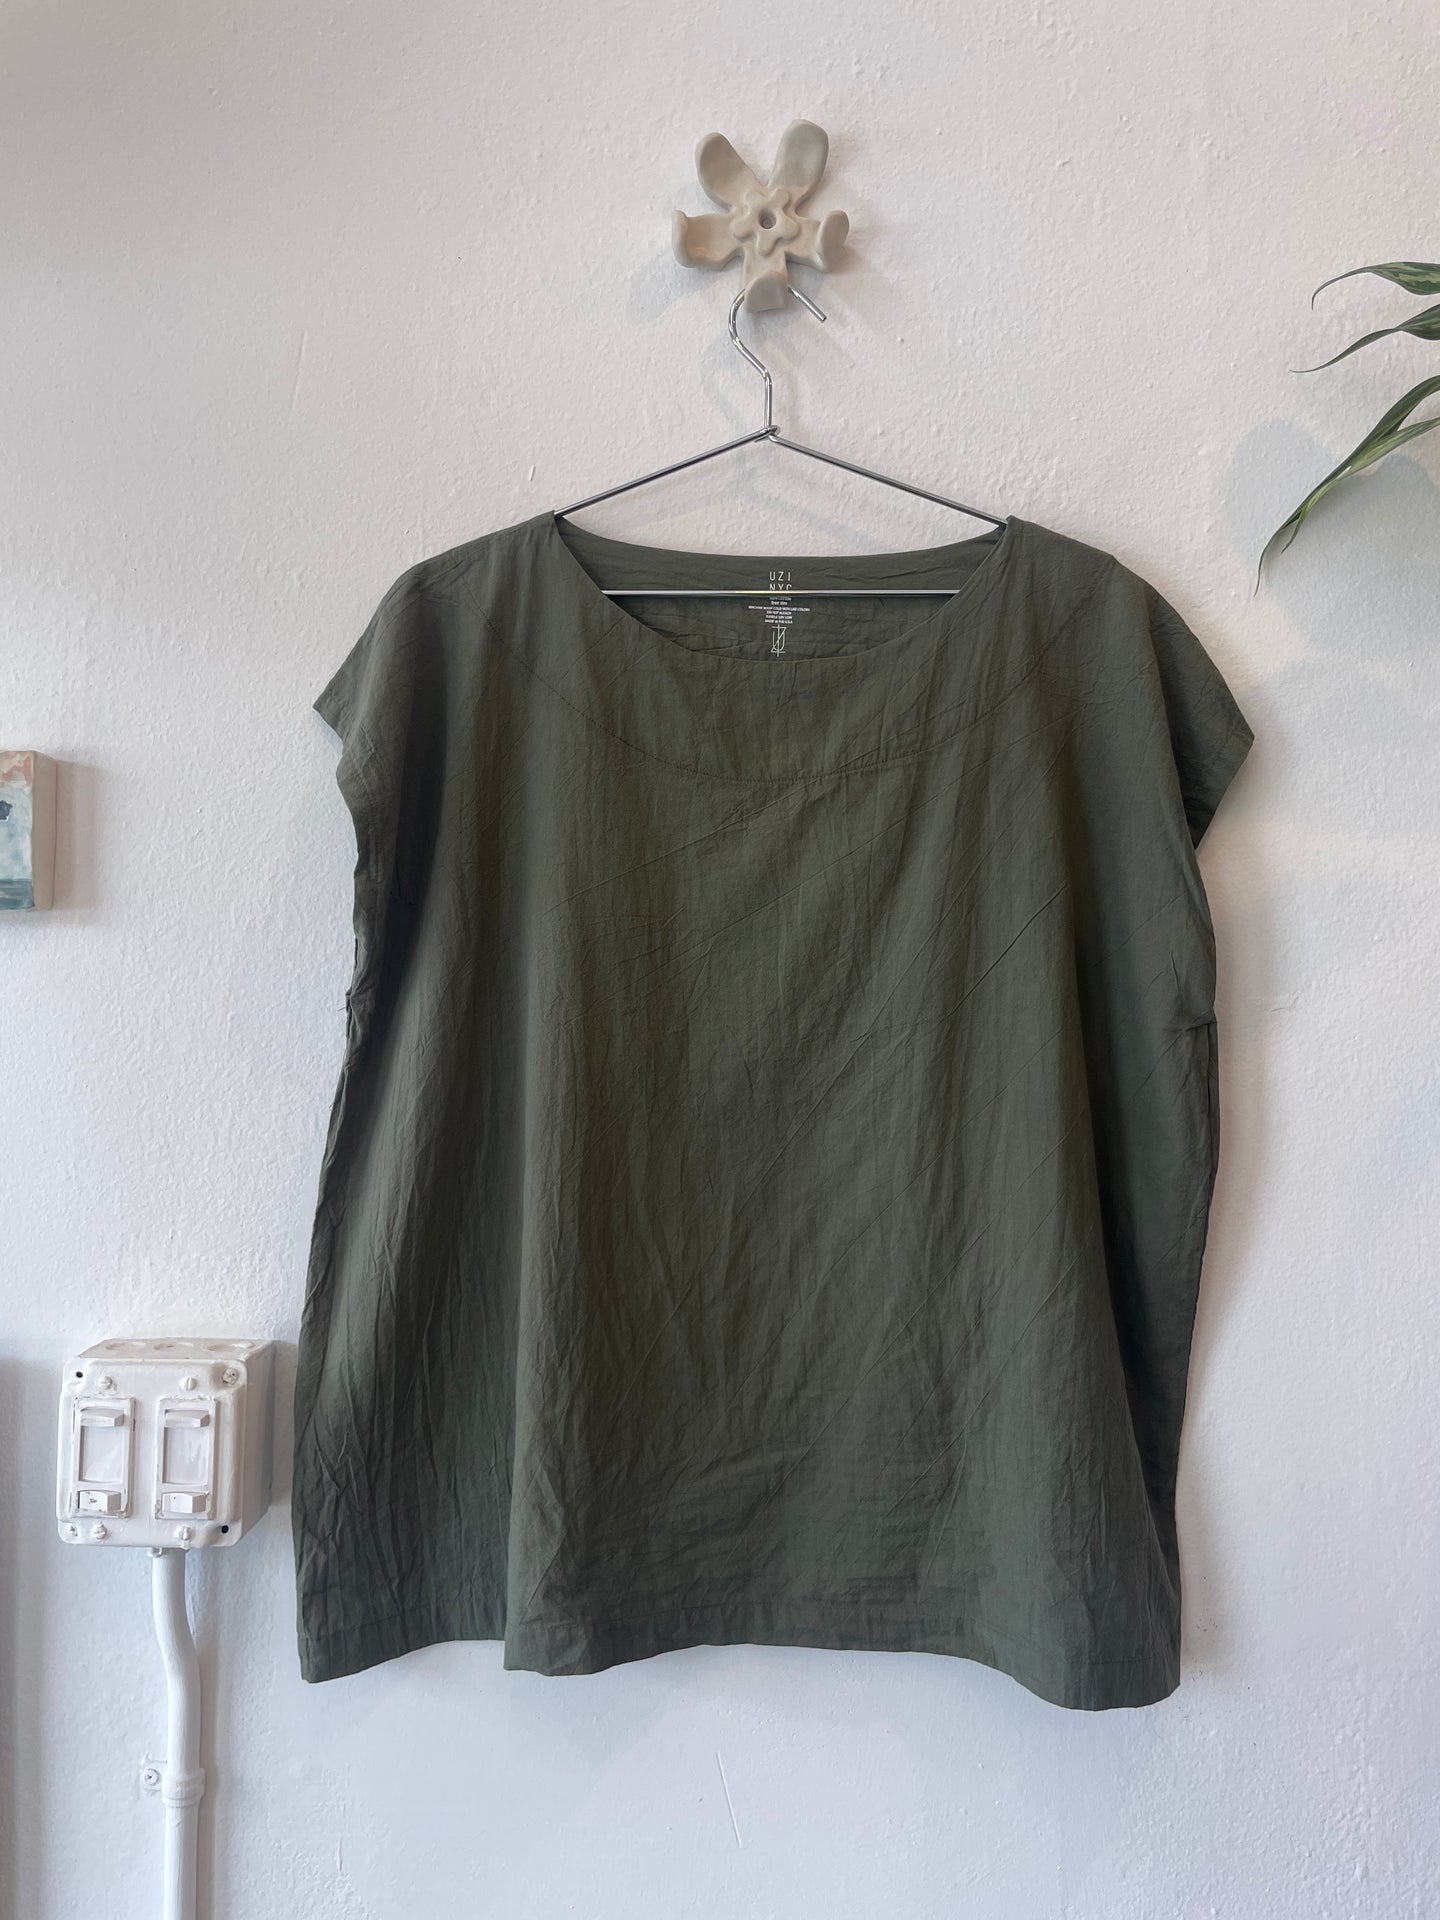 Tunic in Sage